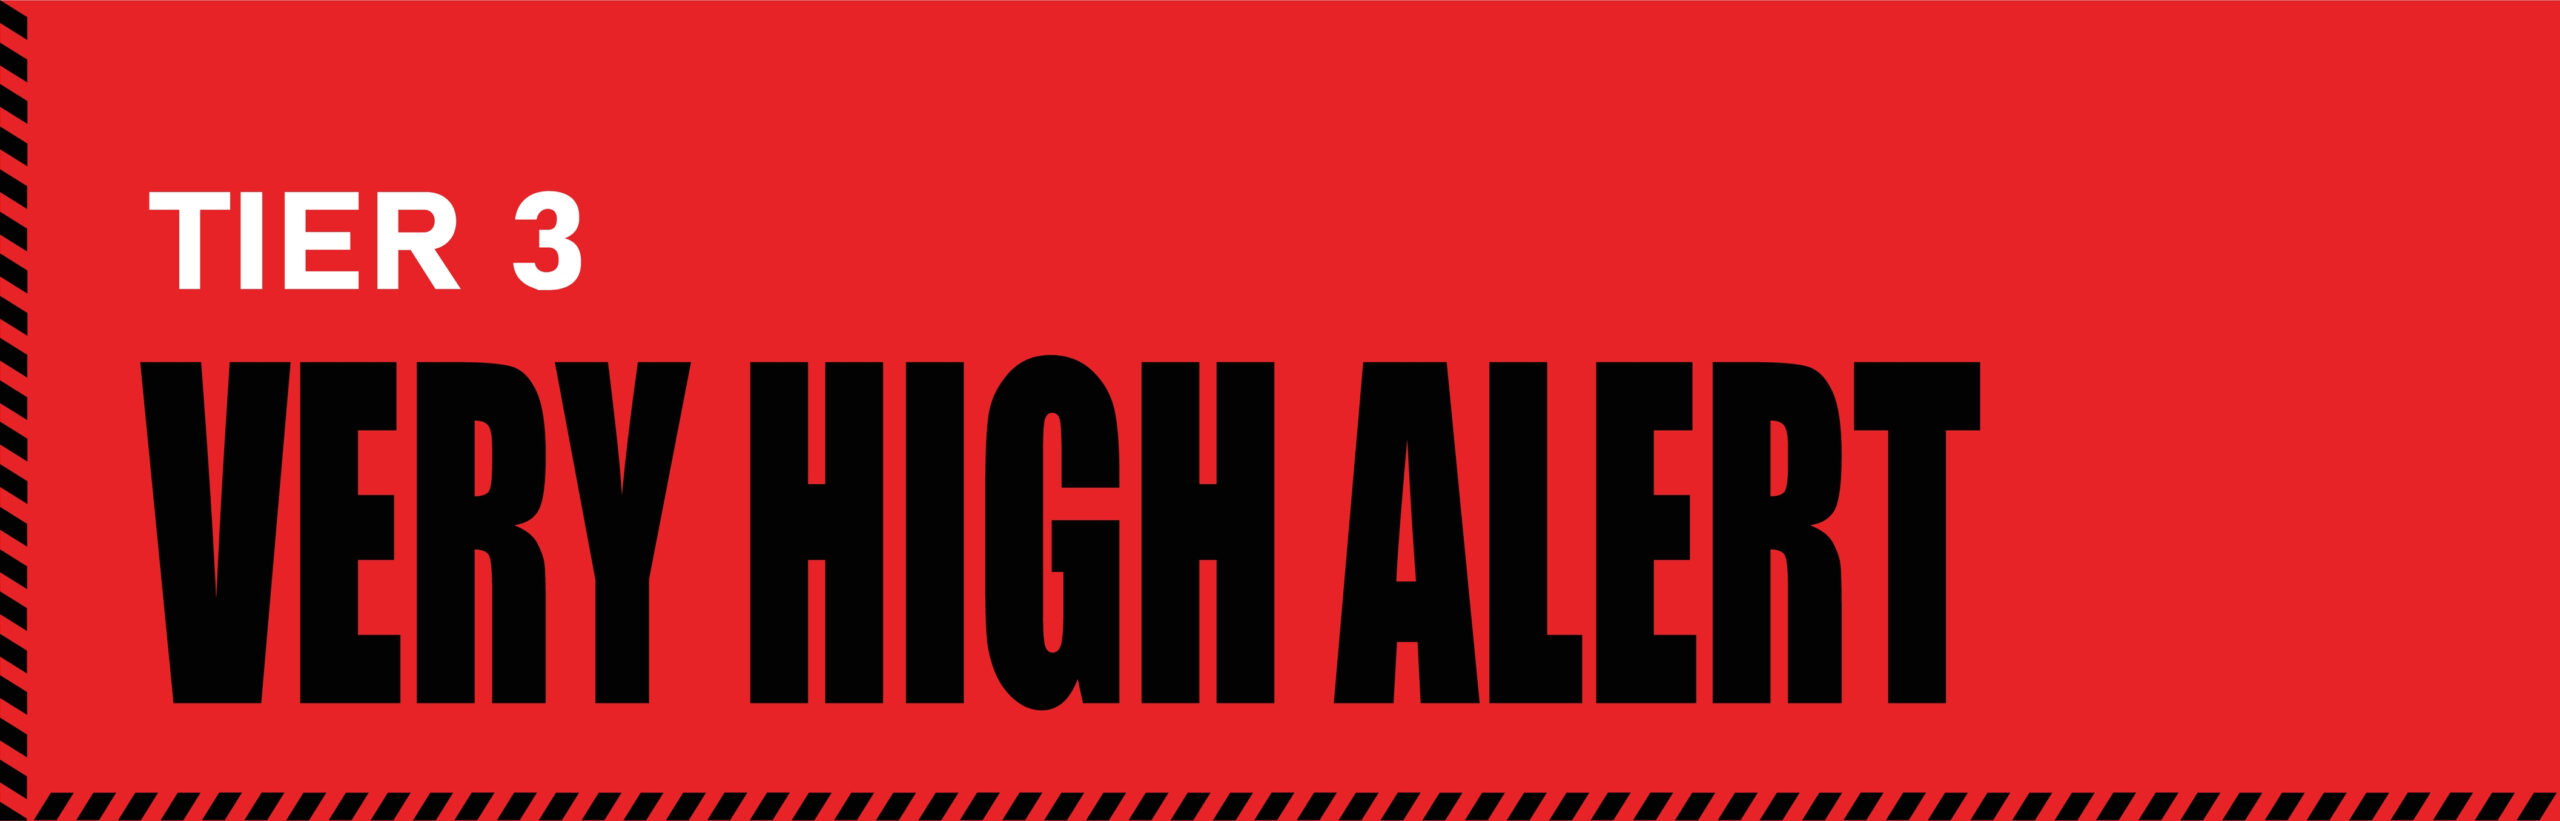 Bright red COVID lockdown banner which reads "Tier 3 Very High Alert"